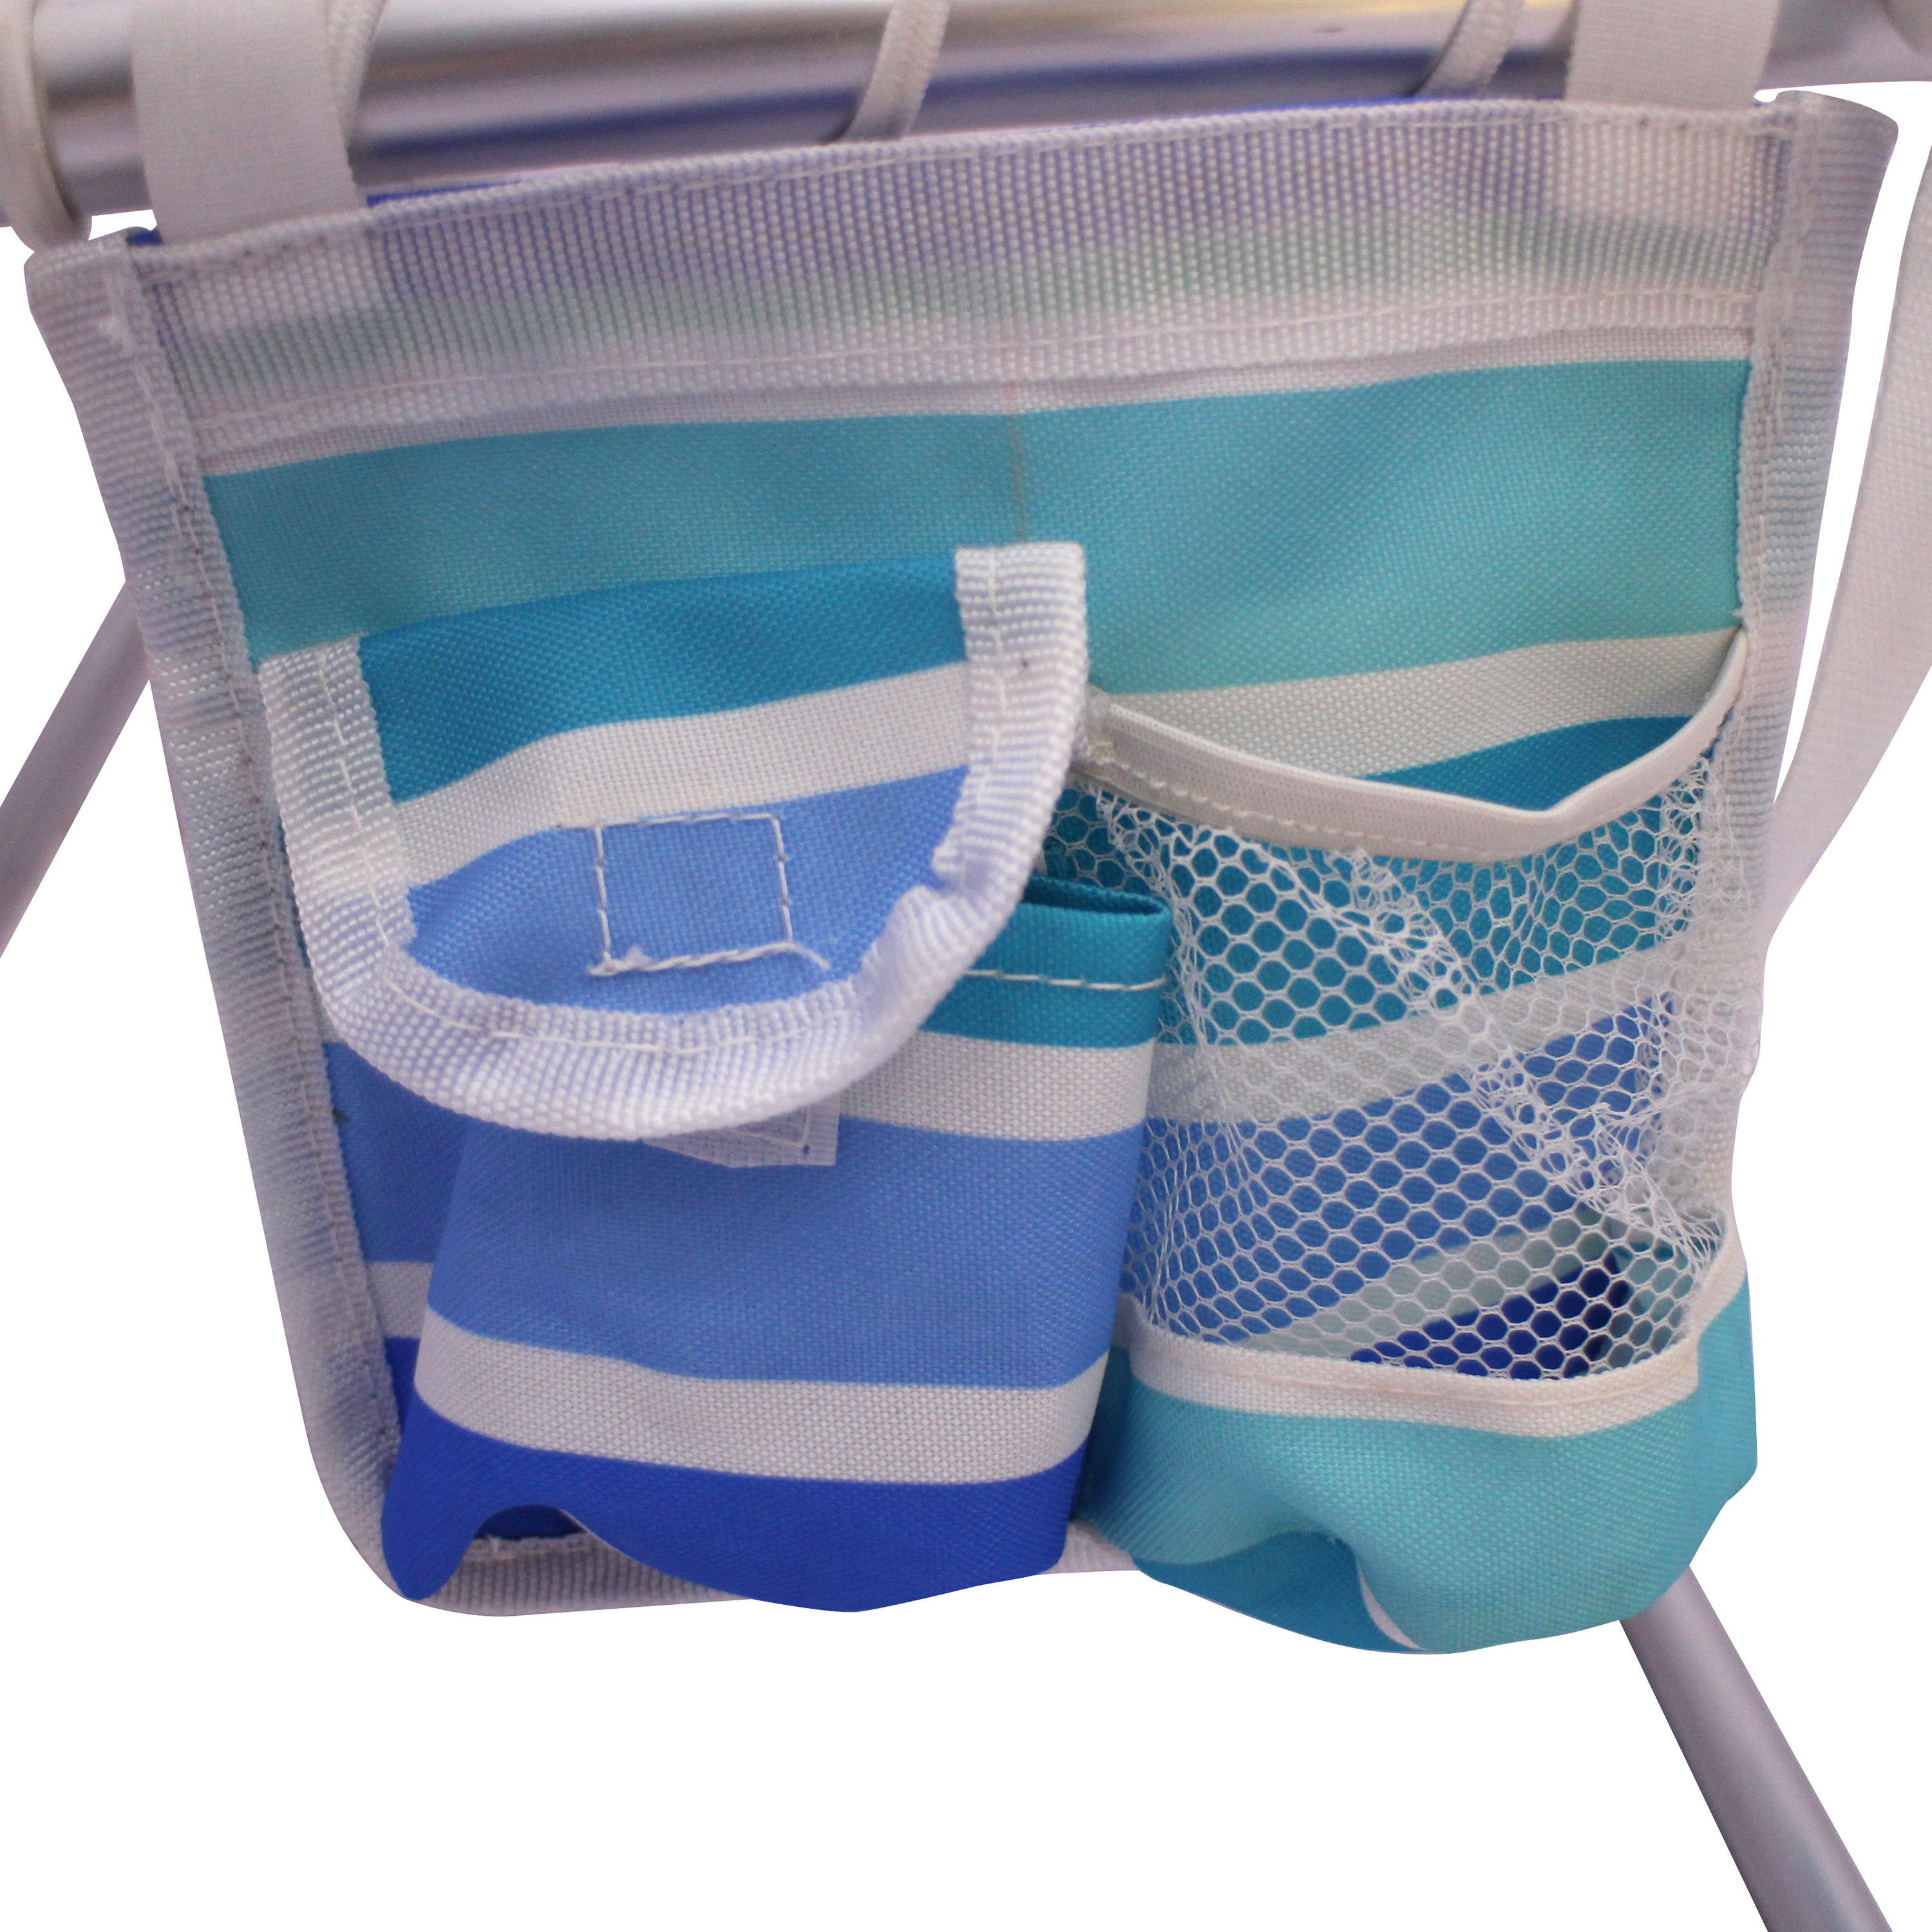 Mainstays Reclining Bungee Beach Chair Blue & Green Stripe - image 5 of 8